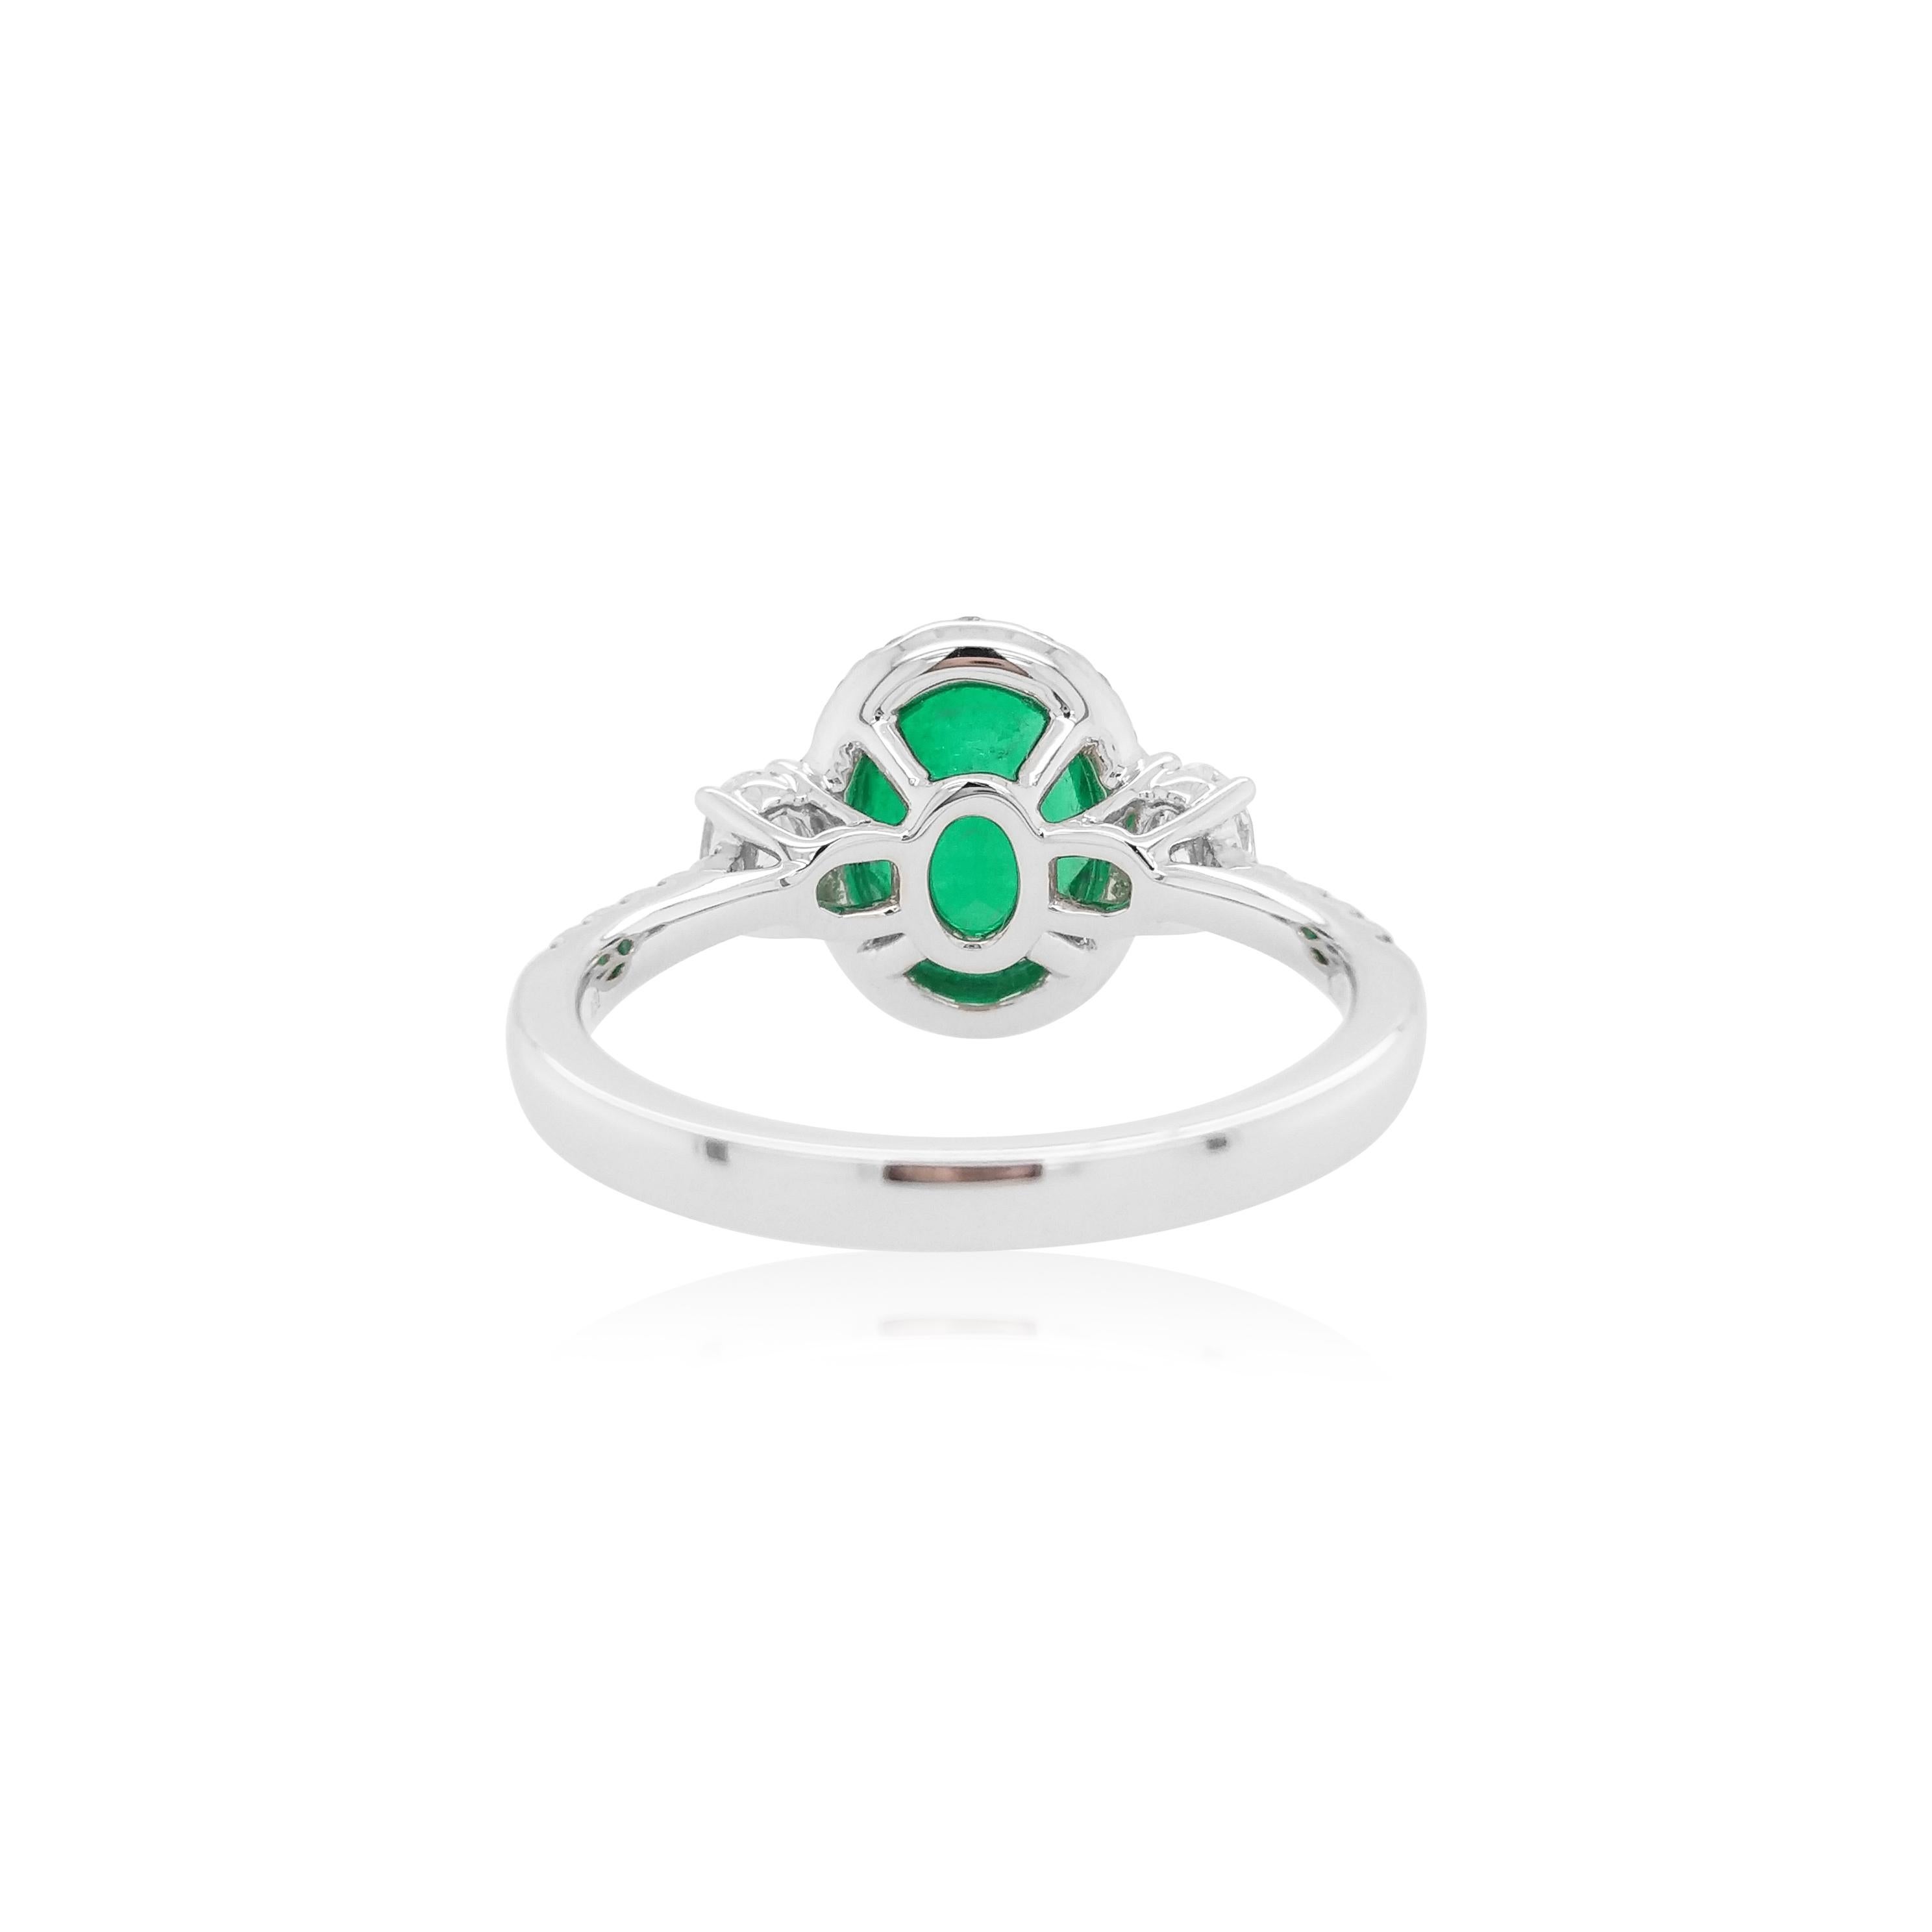 This stunning ring features a vibrant oval-shaped Colombian Emerald at its forefront, accentuated by a delicate white diamond halo surrounding it, and a pair of oval-shaped scintillating white diamonds on the shoulders. Set in 18 Karat white gold to